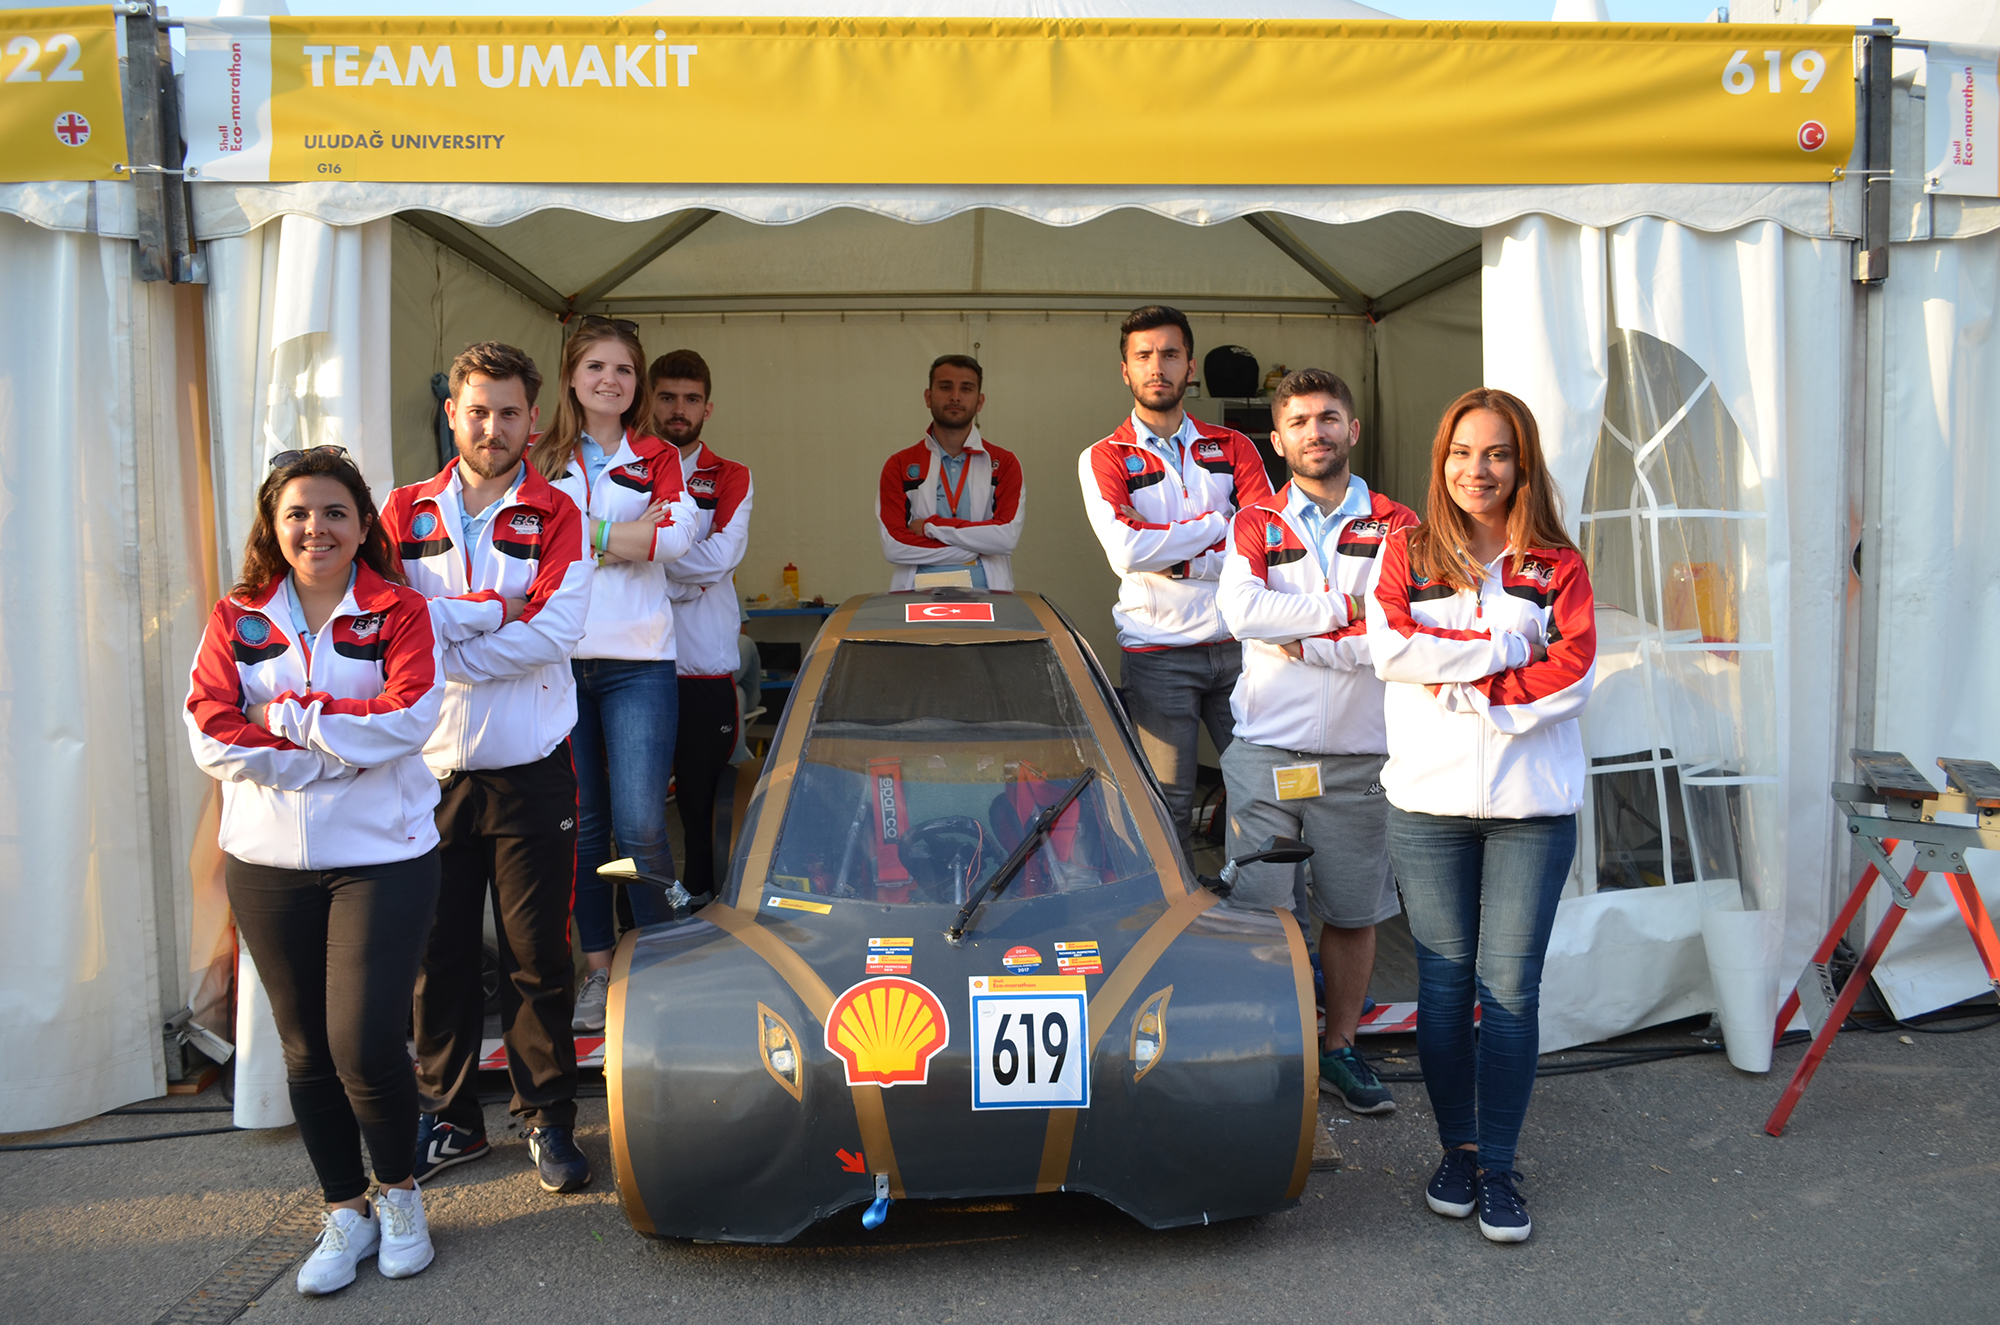 <div>UMAKİT, is developing hydrogen-powered cars.İt has participated and beig  part in competitions in international level in recent years representing Turkey.<br />
<br />
Shell Eco-Marathon Europe, based on the longest distance to travel with the least energy, was held in London in July. Turkey team who win the European championship competing with 11 competitors in their field made history as the first Turkish team. İnternal hydrogen powered vehicle with 1 cubic meter of hydrogen gas showed the success of 182.6 kilometers and became the most efficient vehicle.</div>

<div><br />
About a year, 13-students of UMAKİT  team who work with intense tempo  for the tools of the vehicle named Barbarossa,and it woth the effort.</div>

<div><br />
UMAKIT in Istanbul; Shell Eco-Marathon which will be held in Kocaeli  Turkey by TÜBİTAKi Efficiency Challenge races will be attended by energy-efficient vehicles. </div>